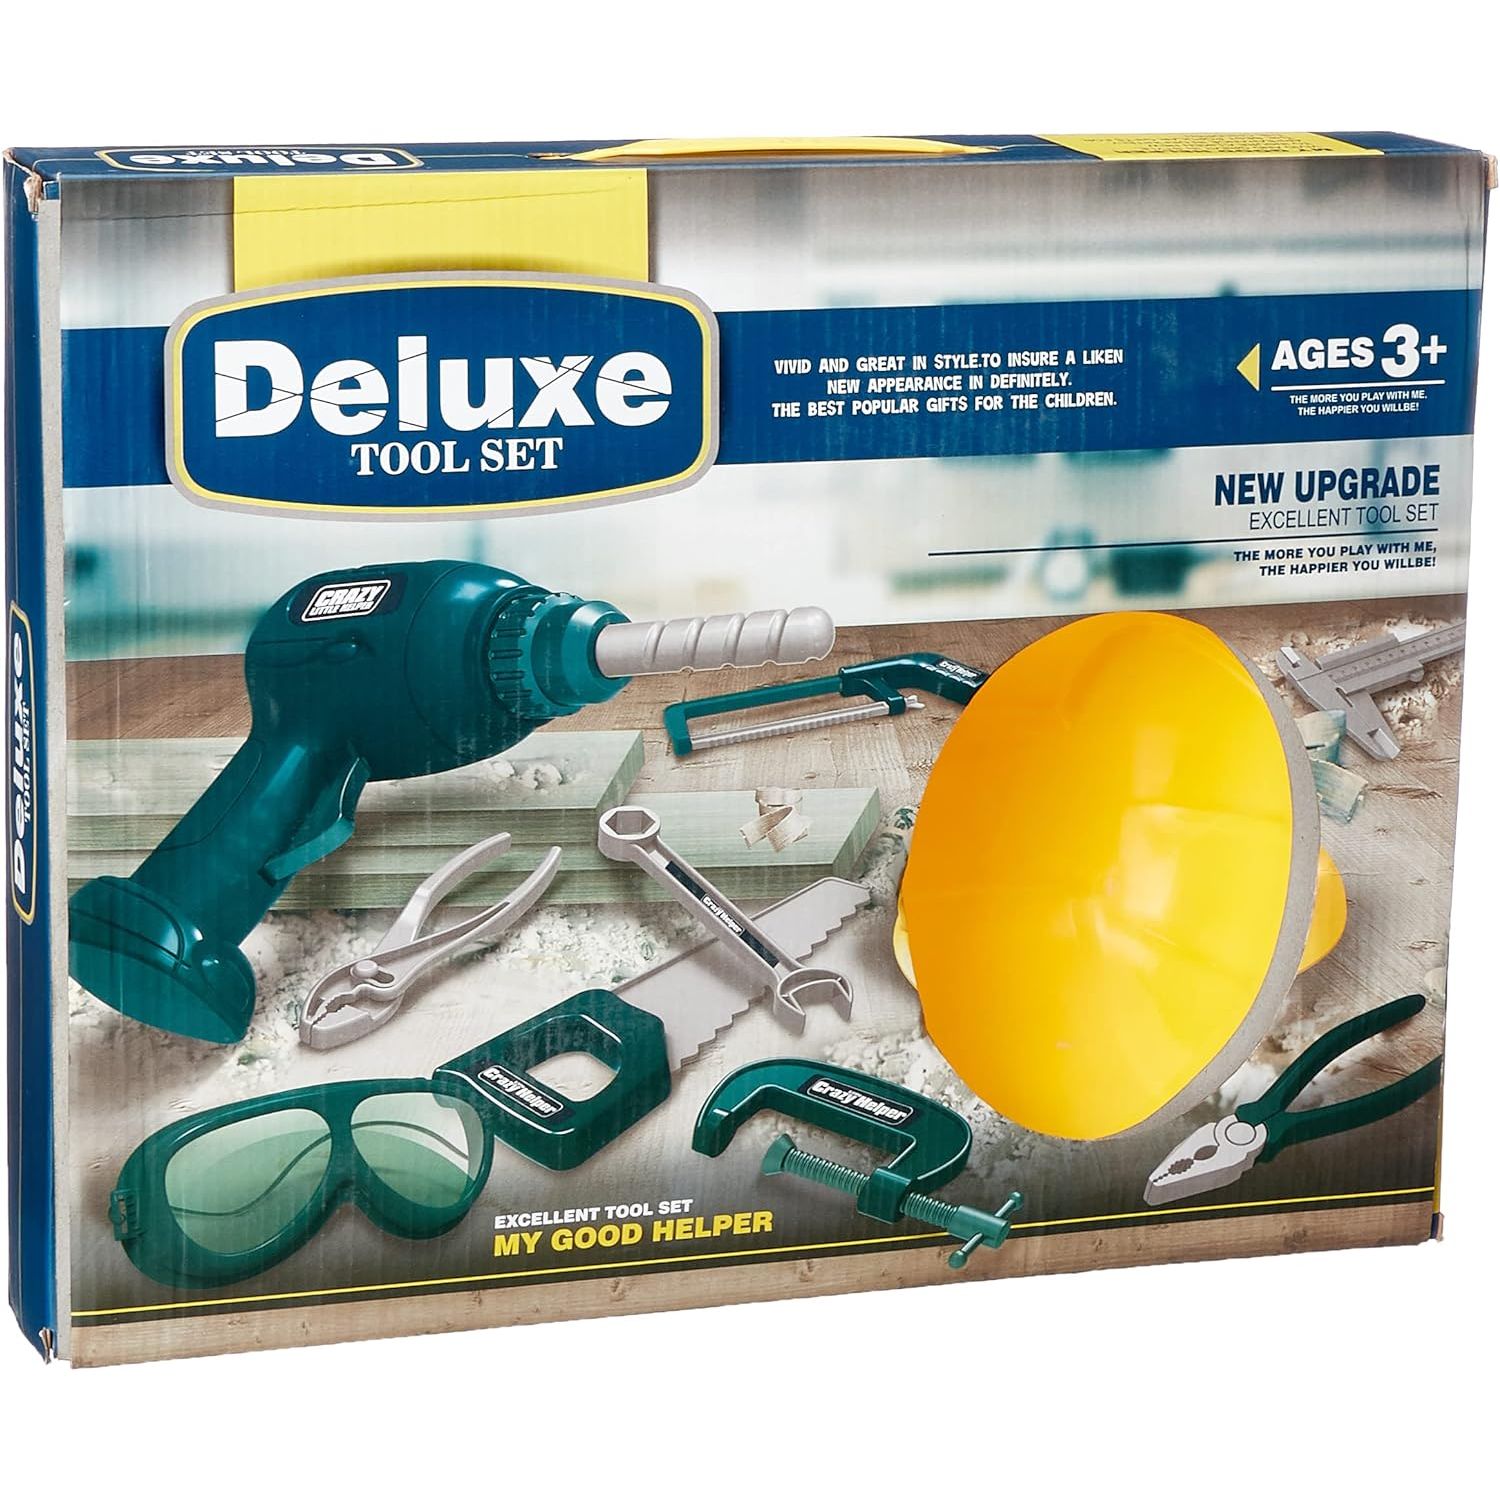 Deluxe tool set New Upgrade Excellent Tool Set for kids 15 PCS - 3288-F1